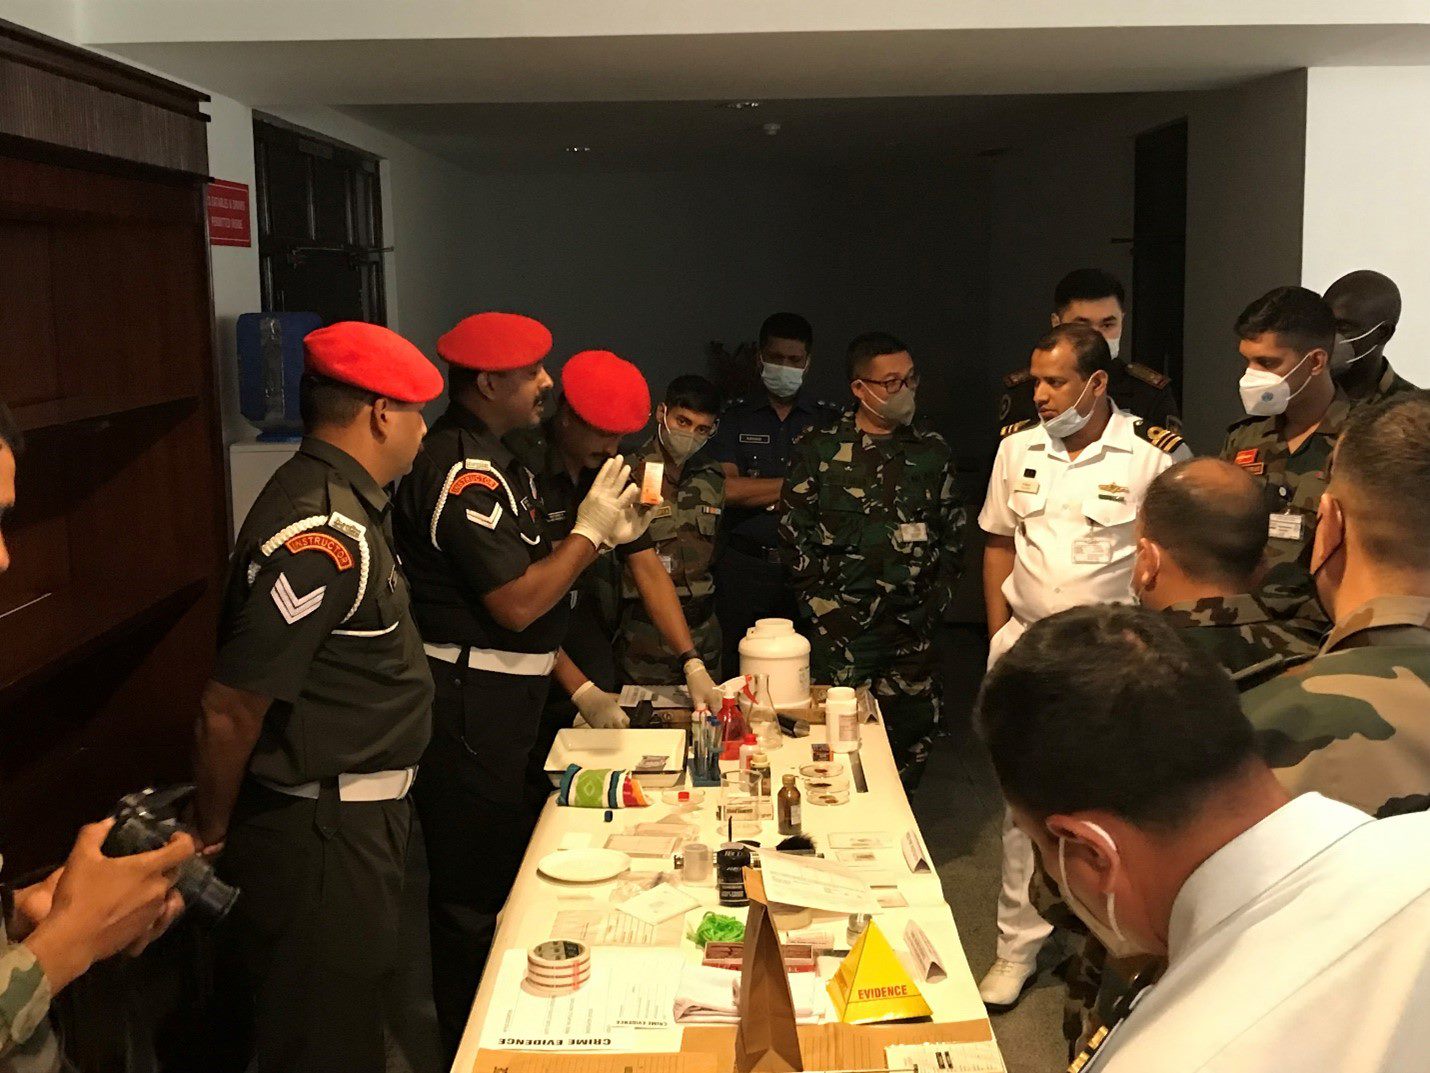 A group of Indian military police in red berets stand around a table and show their investigation kits to military and police trainers.